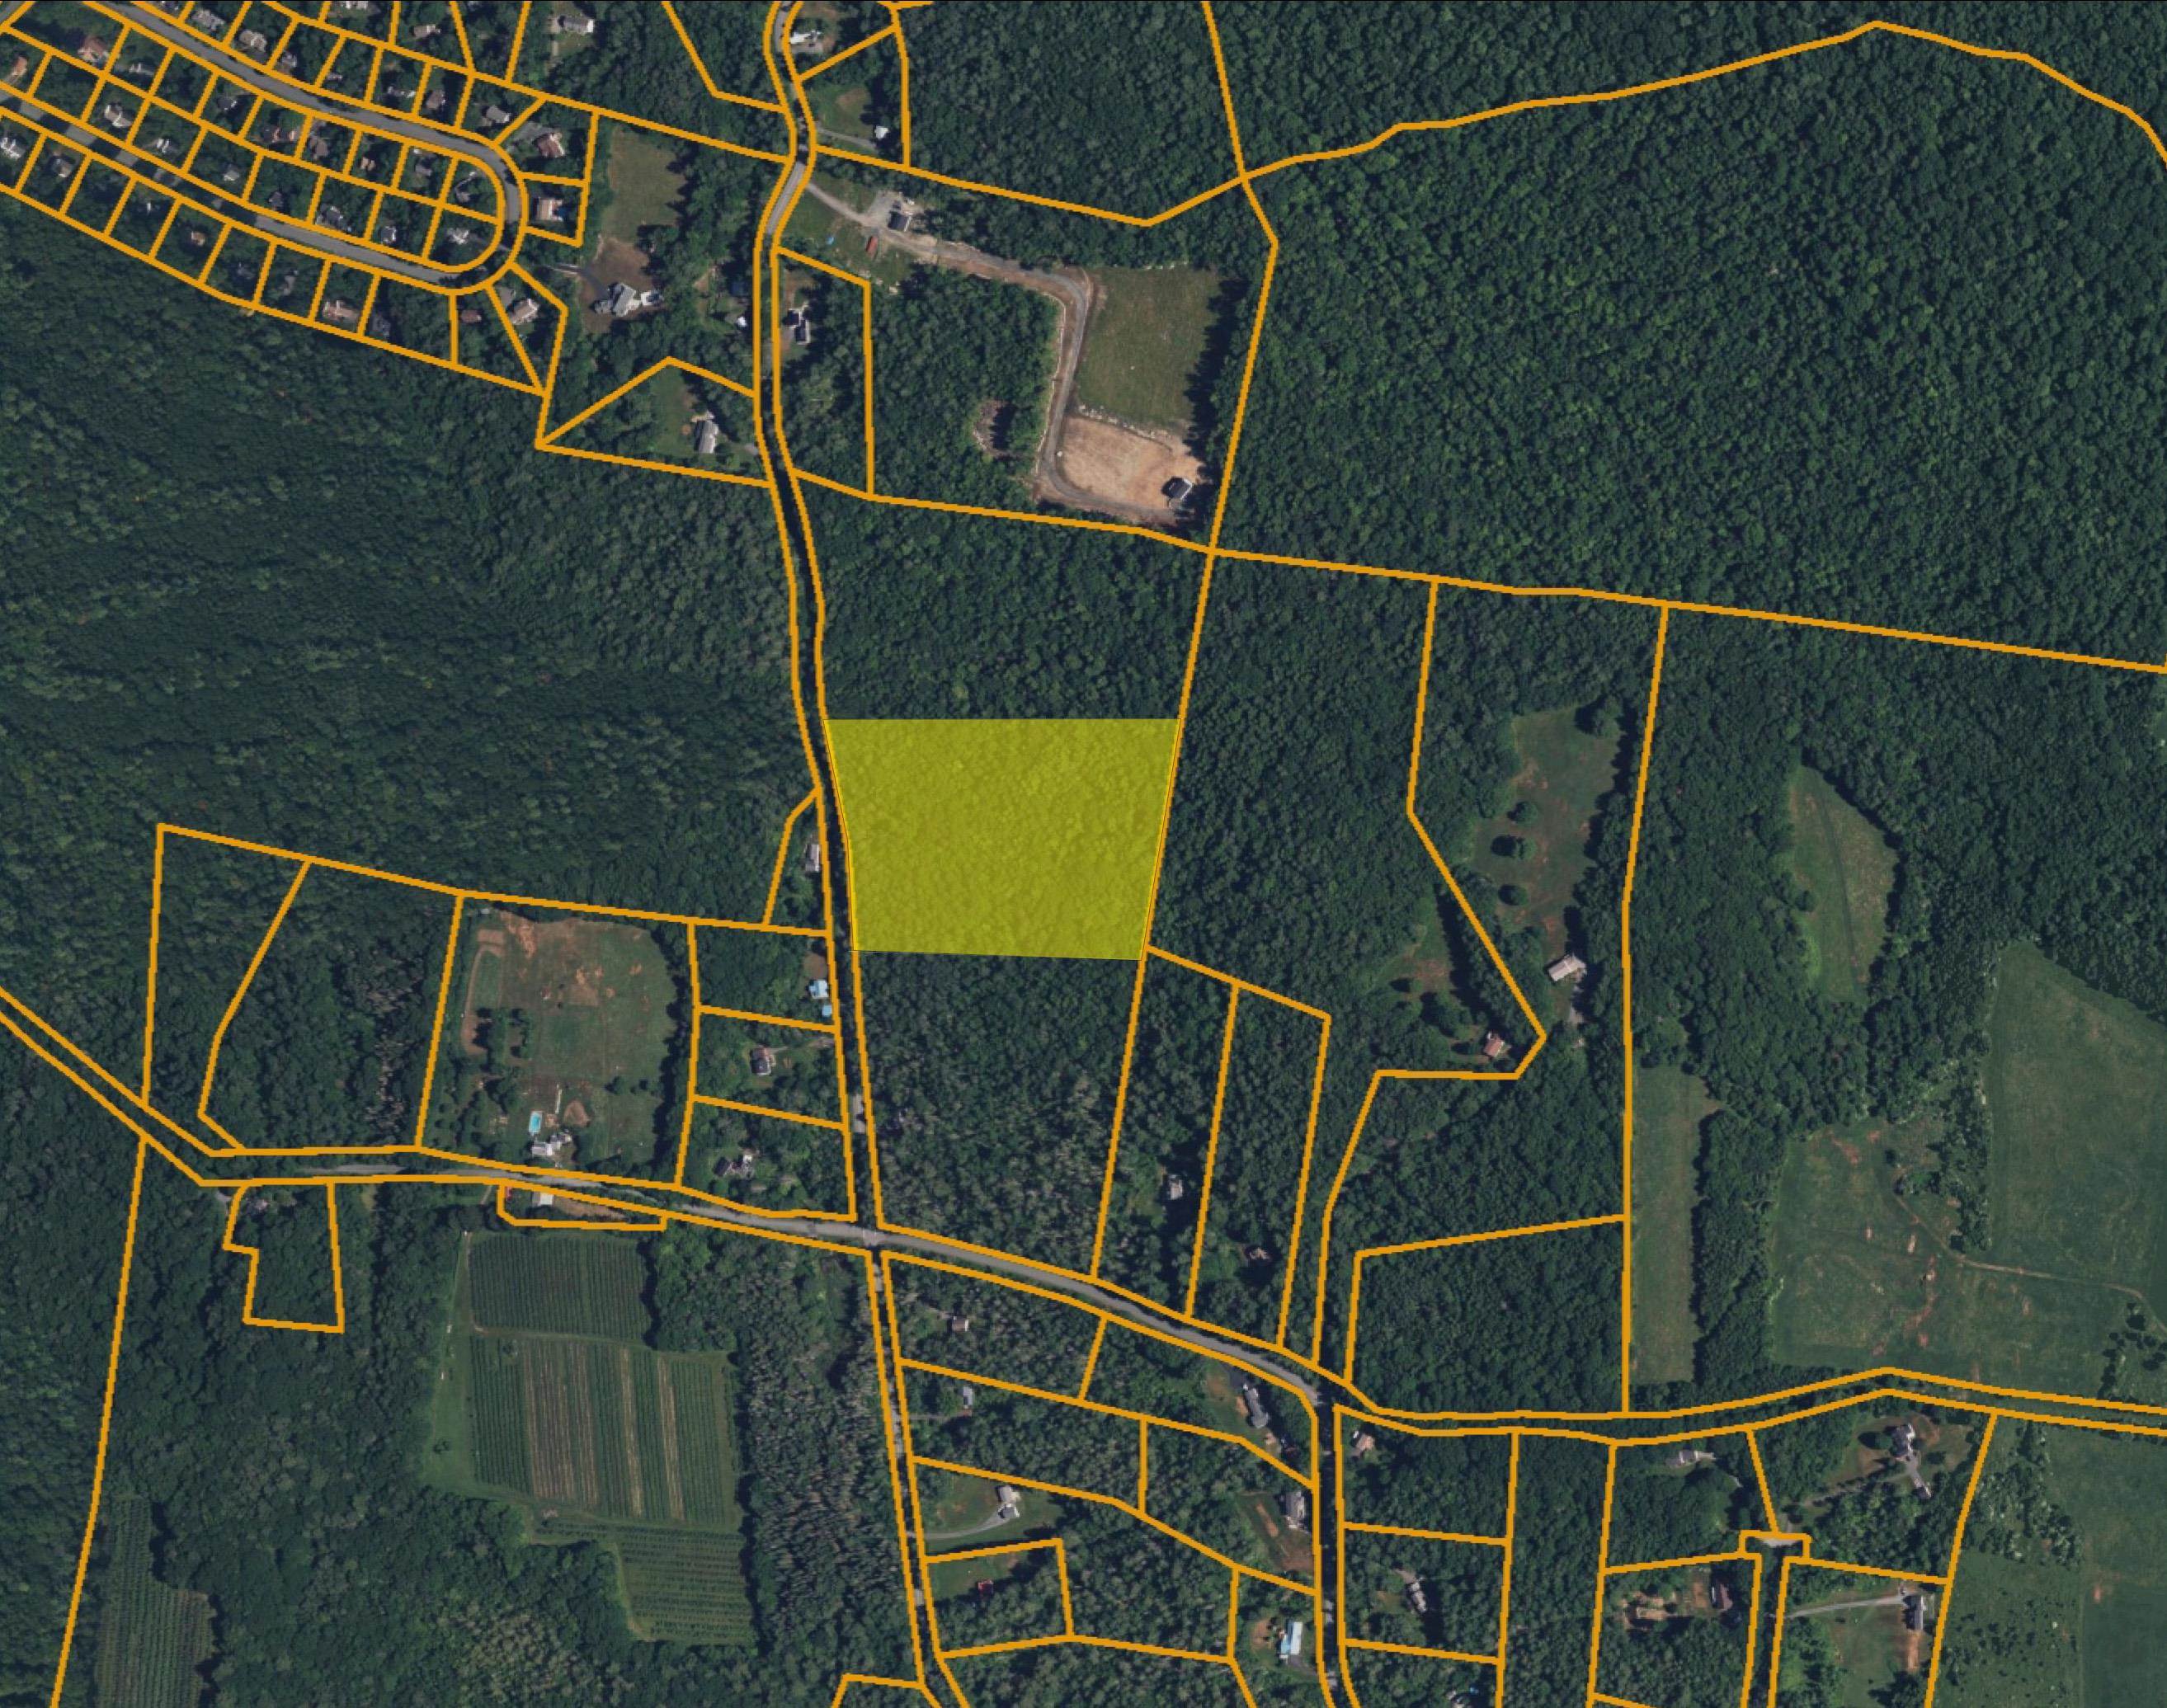 Lebanon NH 03766 Land for sale $List Price is $295,000